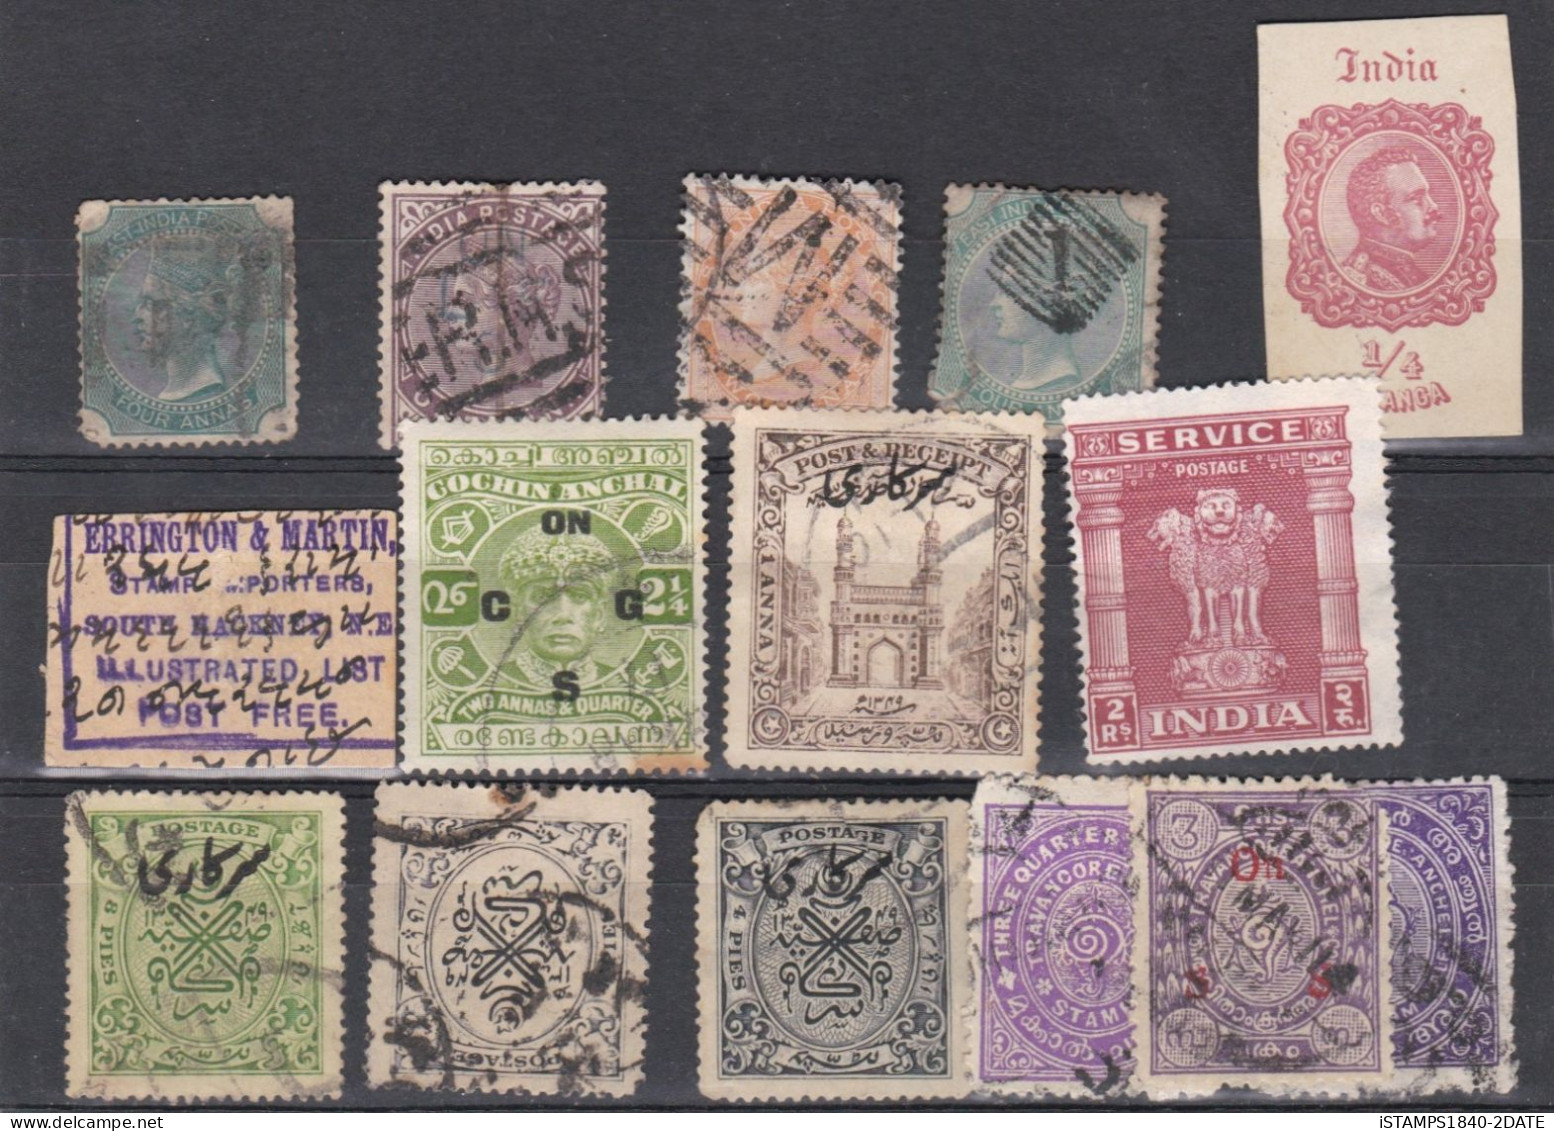 00032/ India QV+ Selection Including States 15 Items Used - 1882-1901 Impero